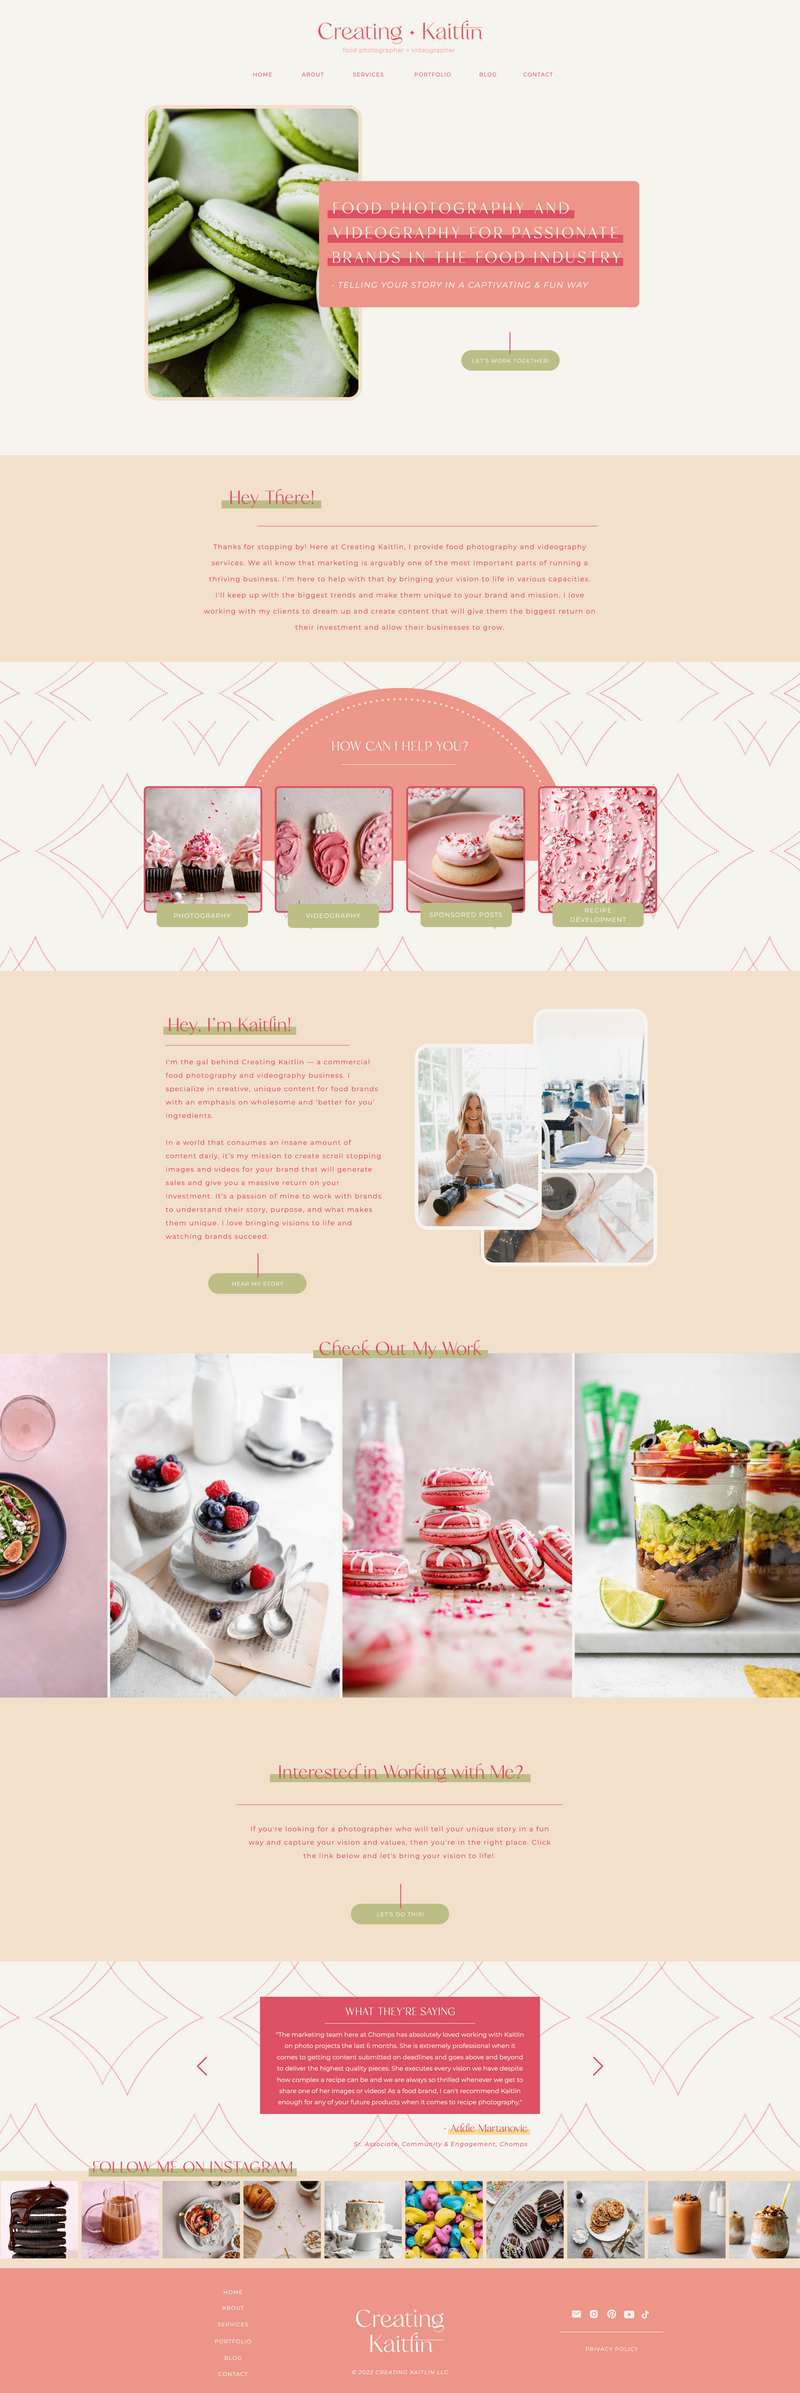 creating-kaitlin-website-home-page-design